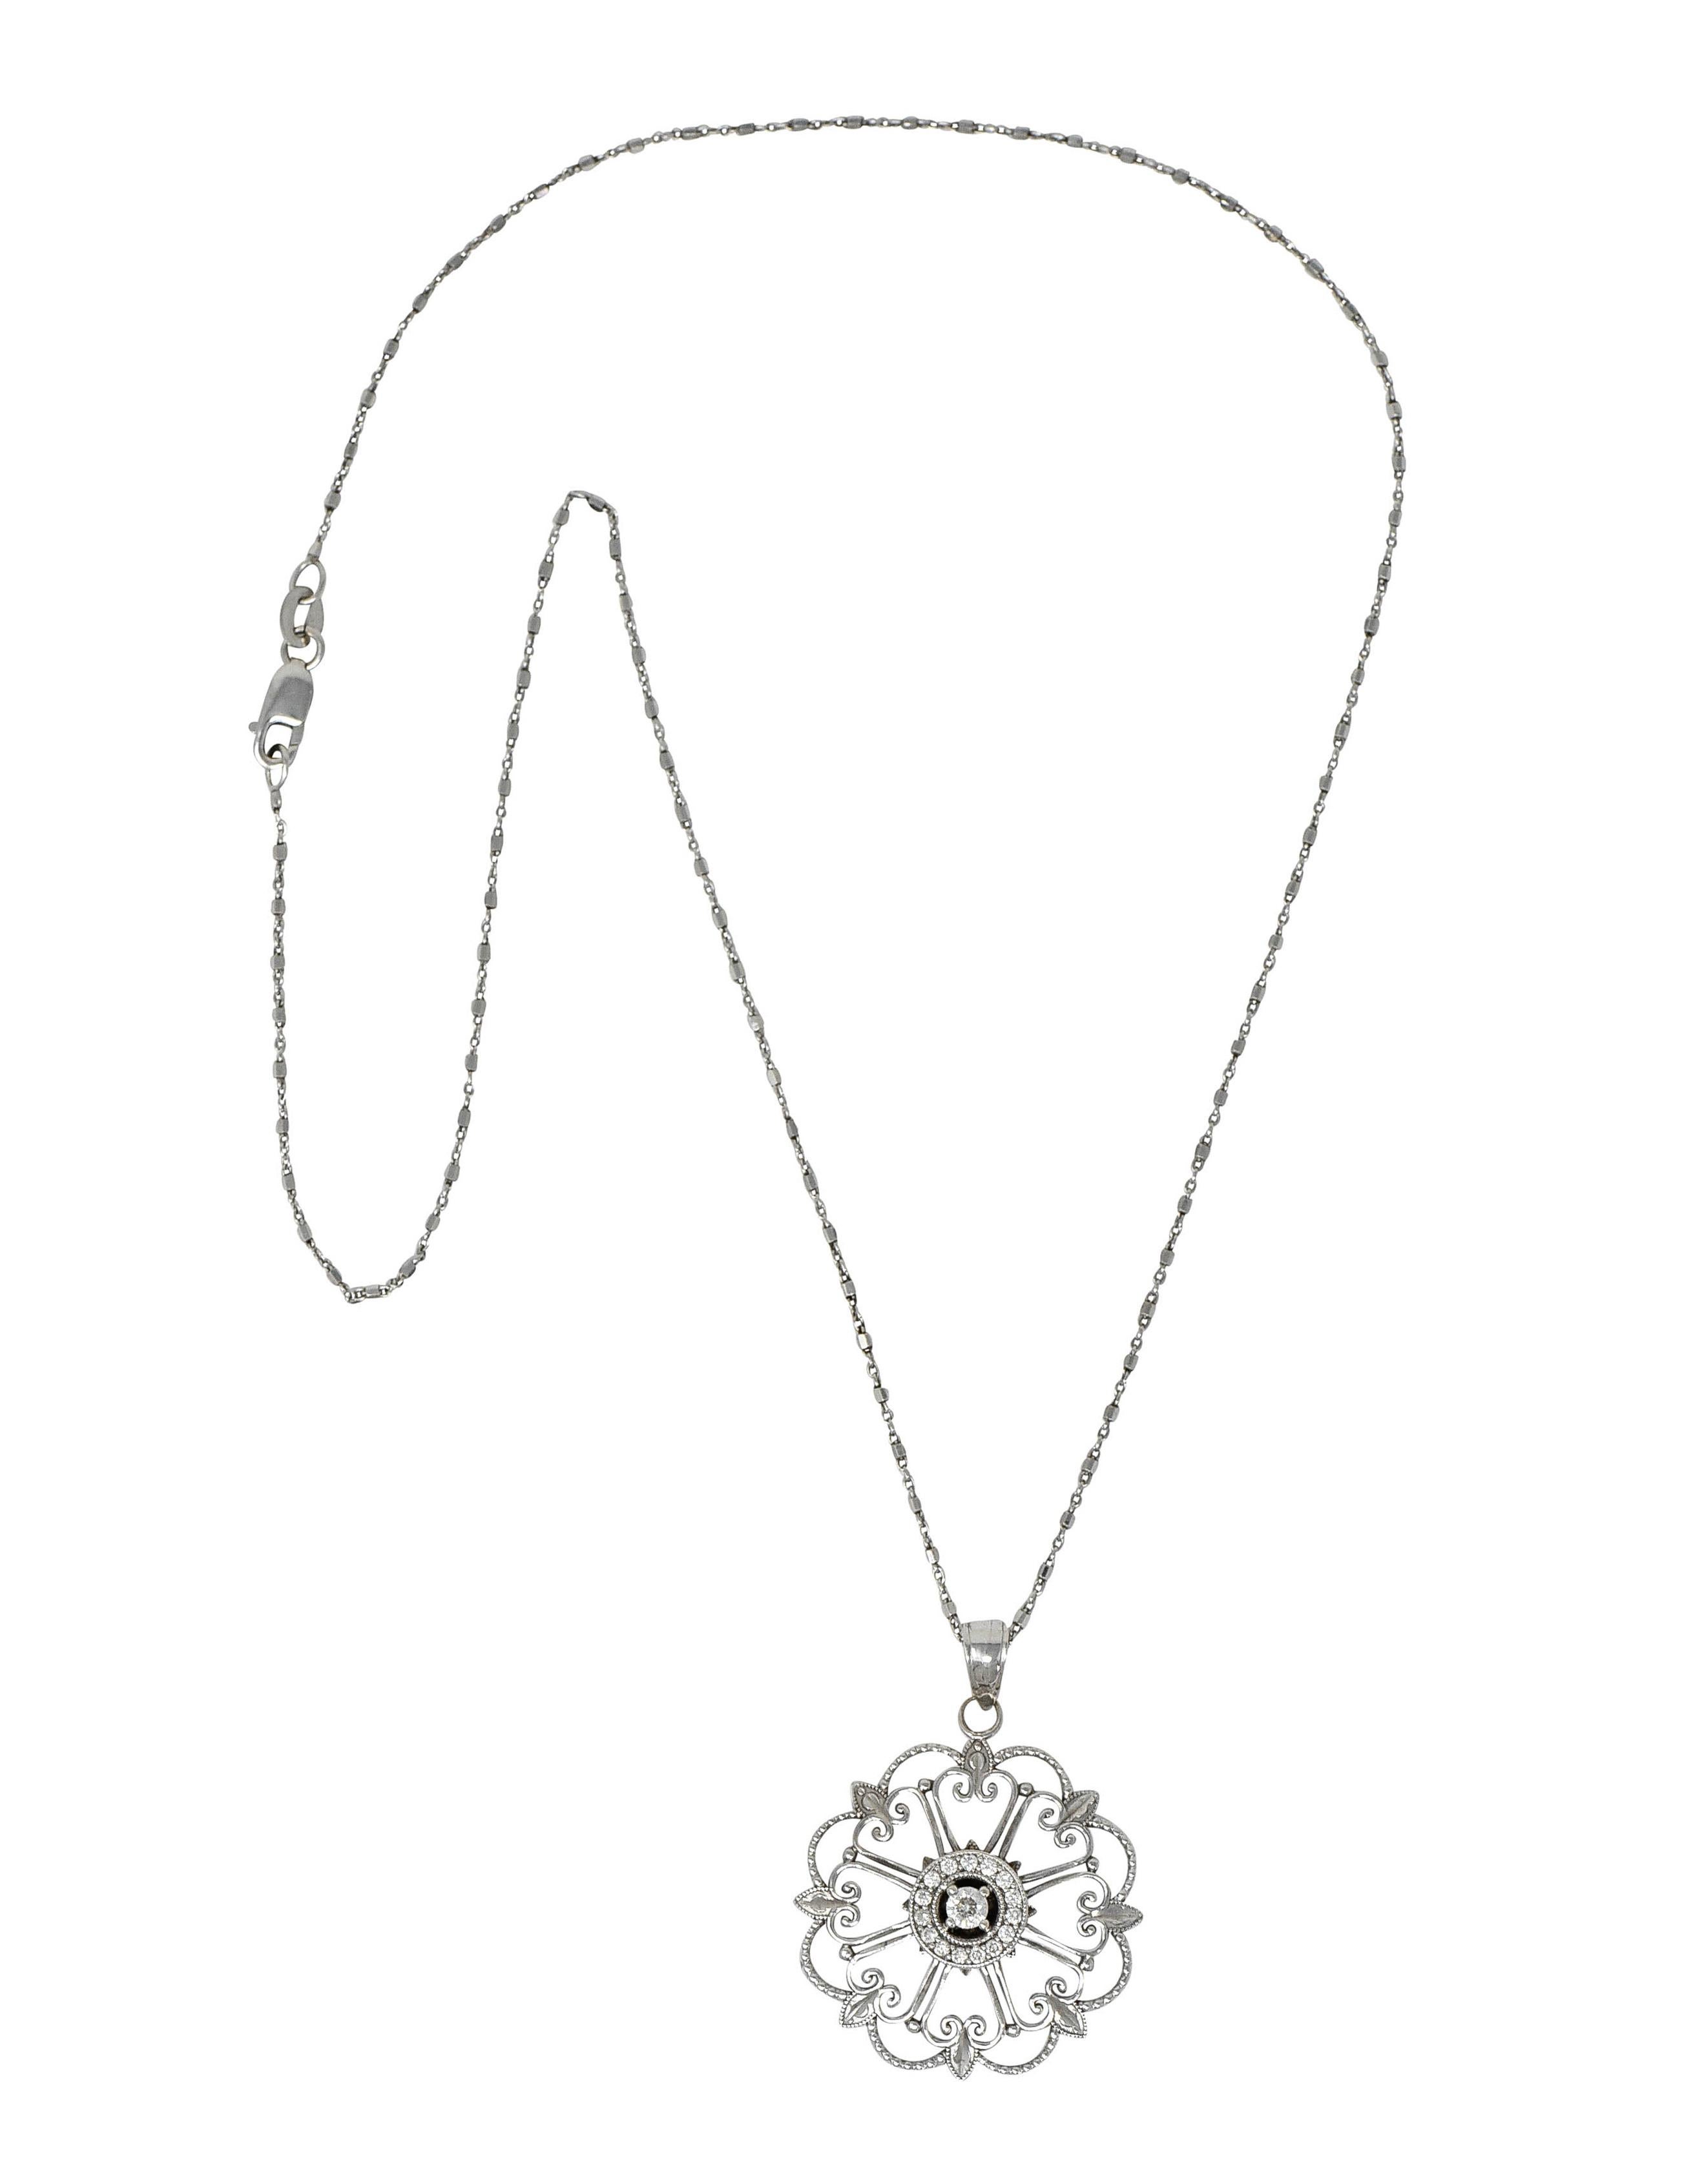 Pendant is designed as a stylized floral mandala with foliate, milgrain, and scrolled volutes

Centering a round brilliant cut diamond surrounded by a circular diamond halo

Weighing in total approximately 0.25 carat - eye clean and